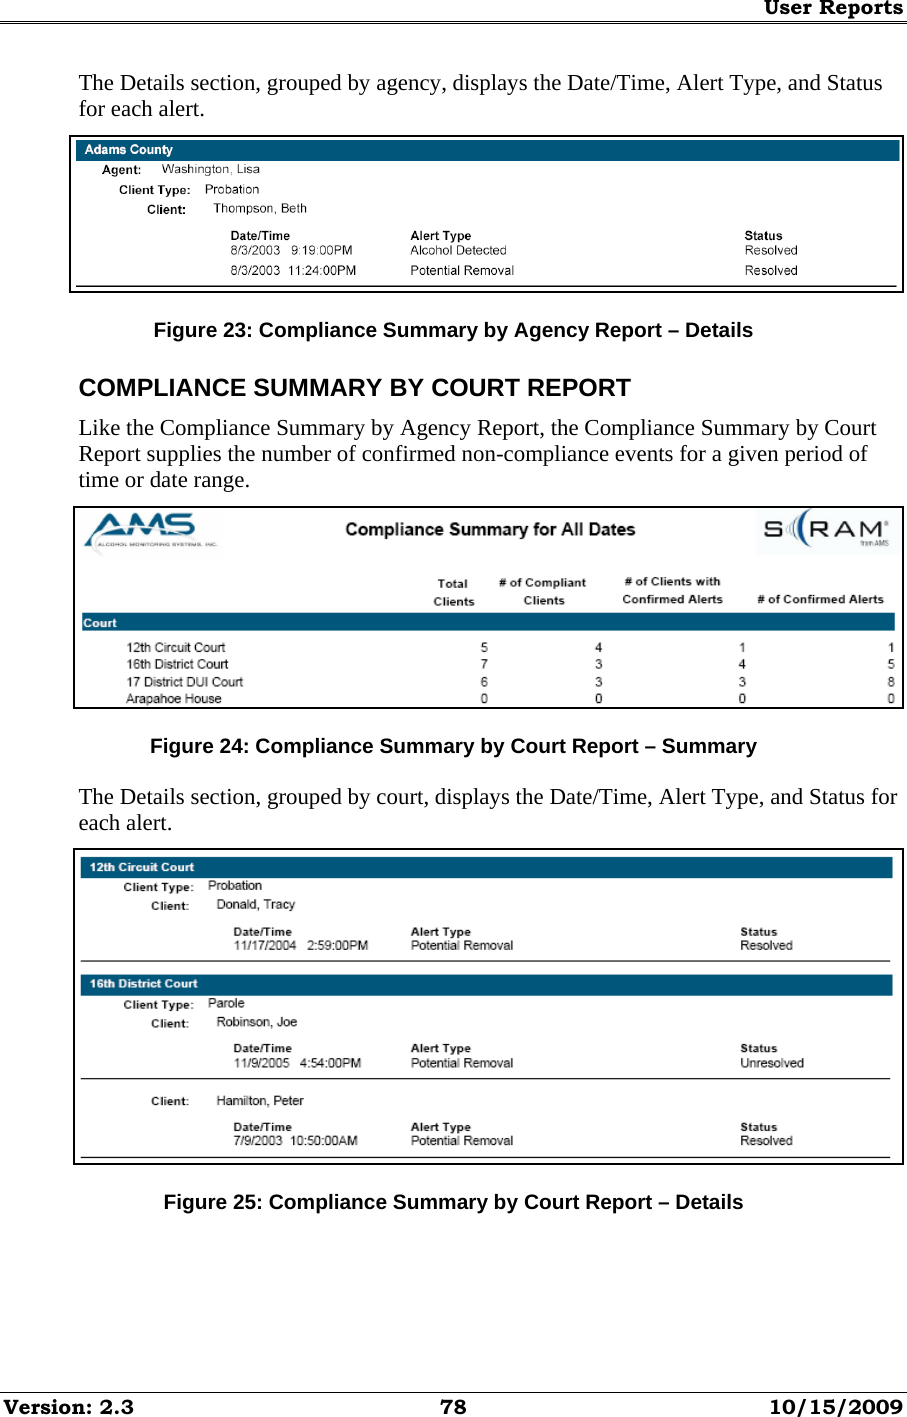 User Reports Version: 2.3  78  10/15/2009 The Details section, grouped by agency, displays the Date/Time, Alert Type, and Status for each alert.  Figure 23: Compliance Summary by Agency Report – Details COMPLIANCE SUMMARY BY COURT REPORT Like the Compliance Summary by Agency Report, the Compliance Summary by Court Report supplies the number of confirmed non-compliance events for a given period of time or date range.  Figure 24: Compliance Summary by Court Report – Summary The Details section, grouped by court, displays the Date/Time, Alert Type, and Status for each alert.  Figure 25: Compliance Summary by Court Report – Details 